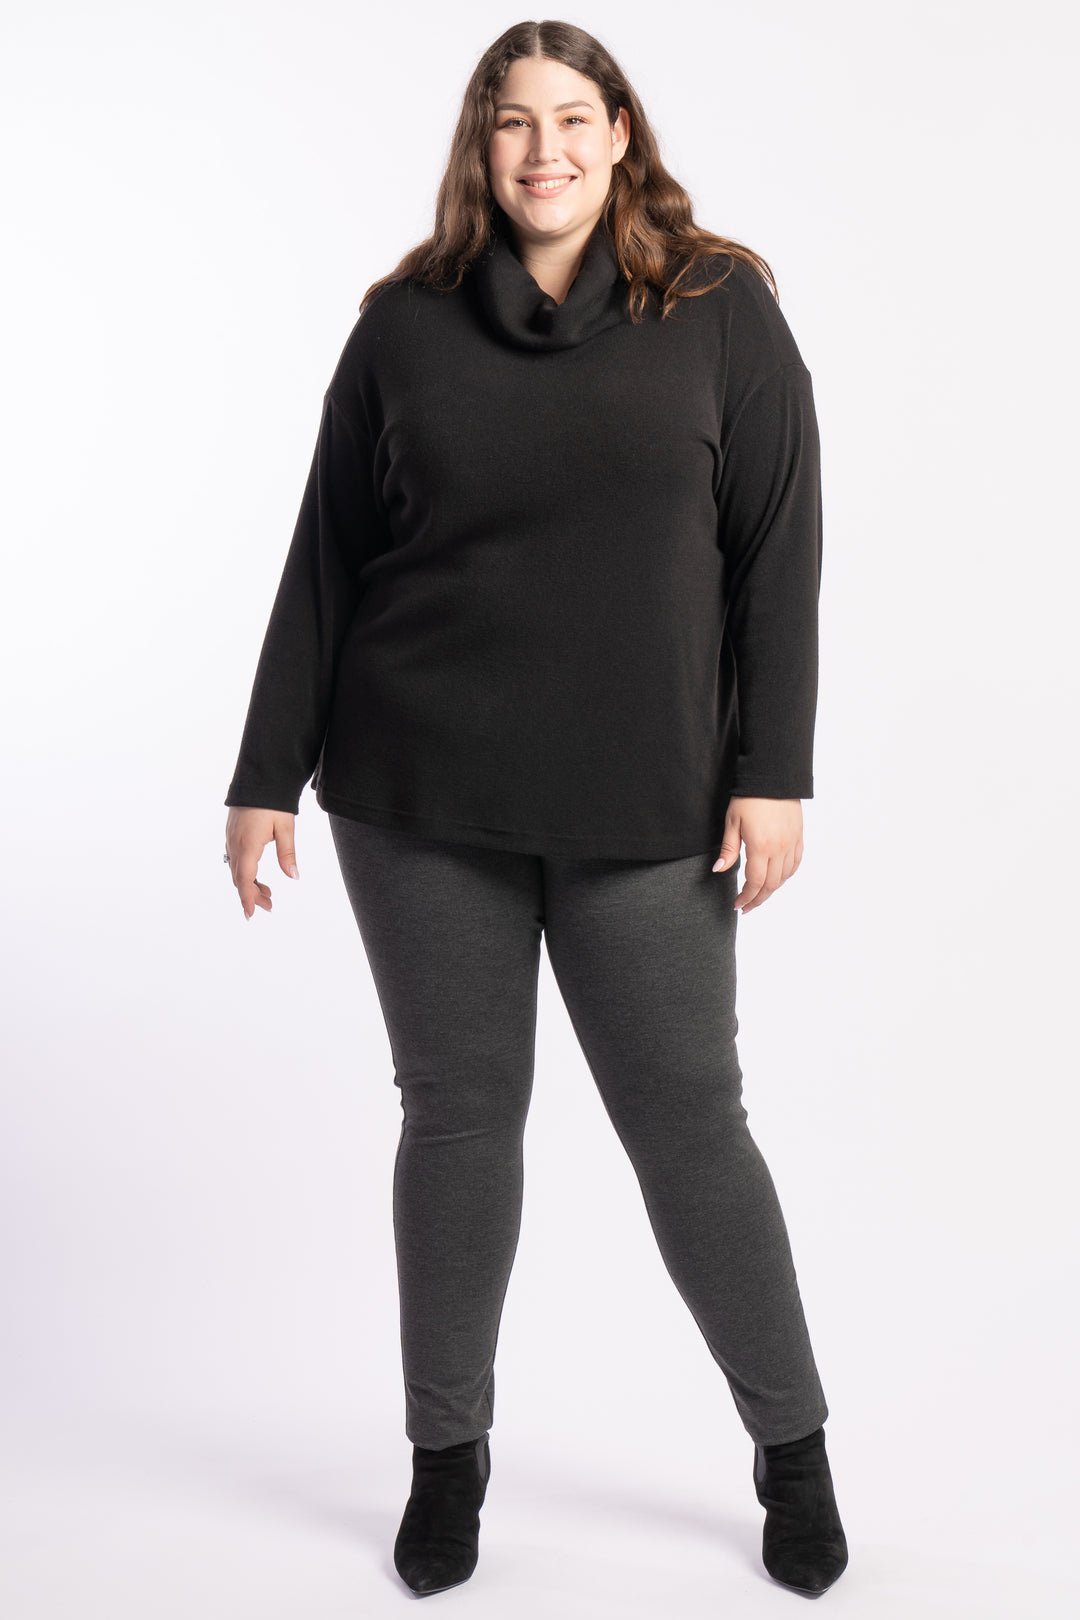 The Essential Ponte Legging - Charcoal - STOCK AVAILABLE - SIZE XS (12/14)